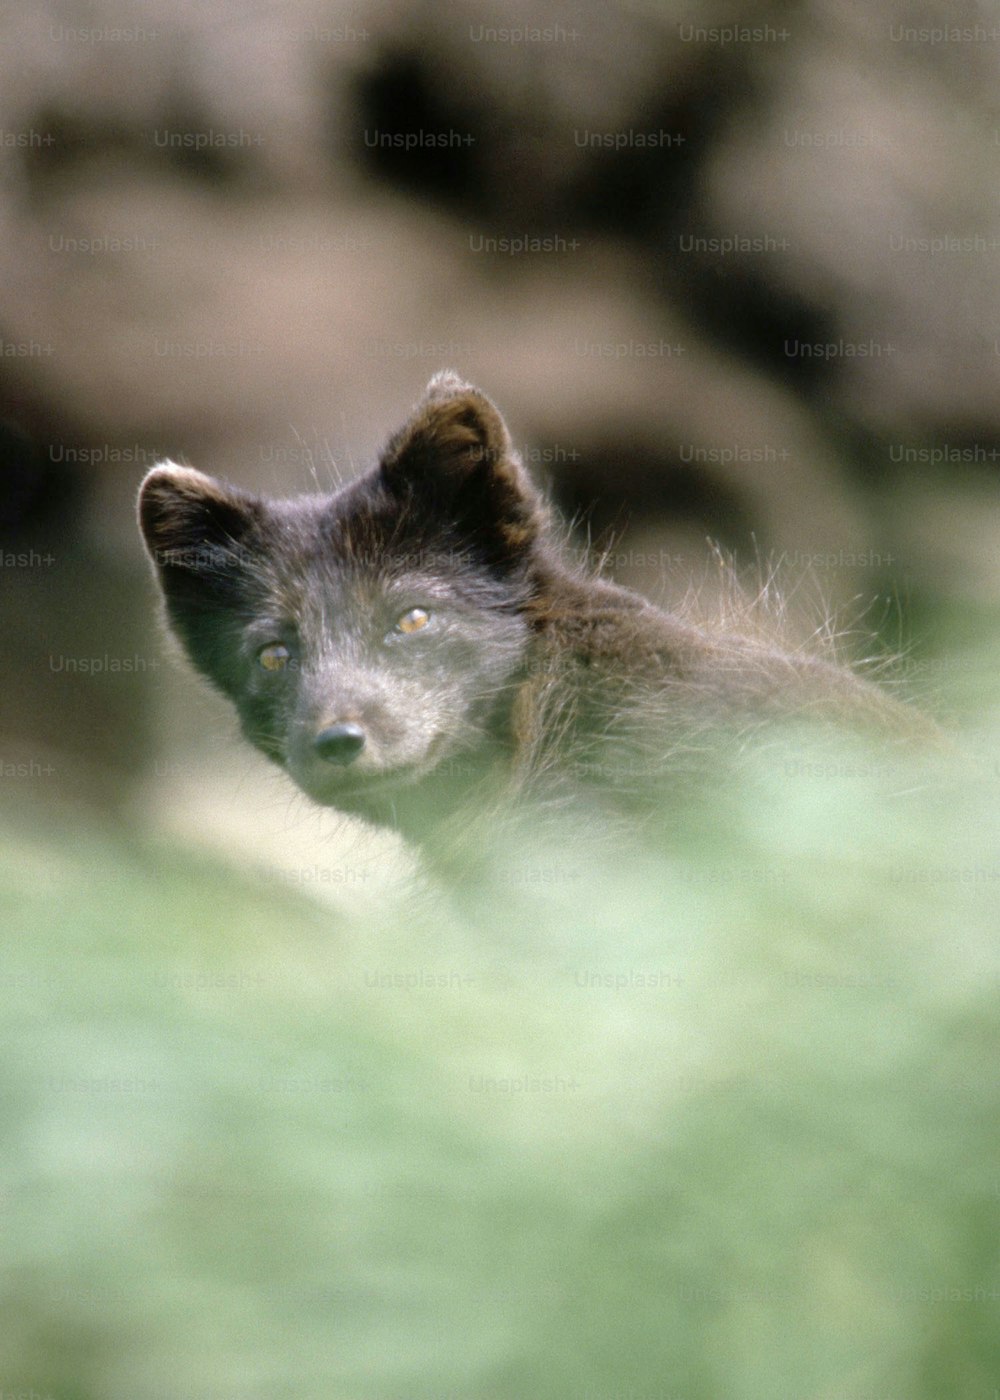 a close up of a small animal with a blurry background